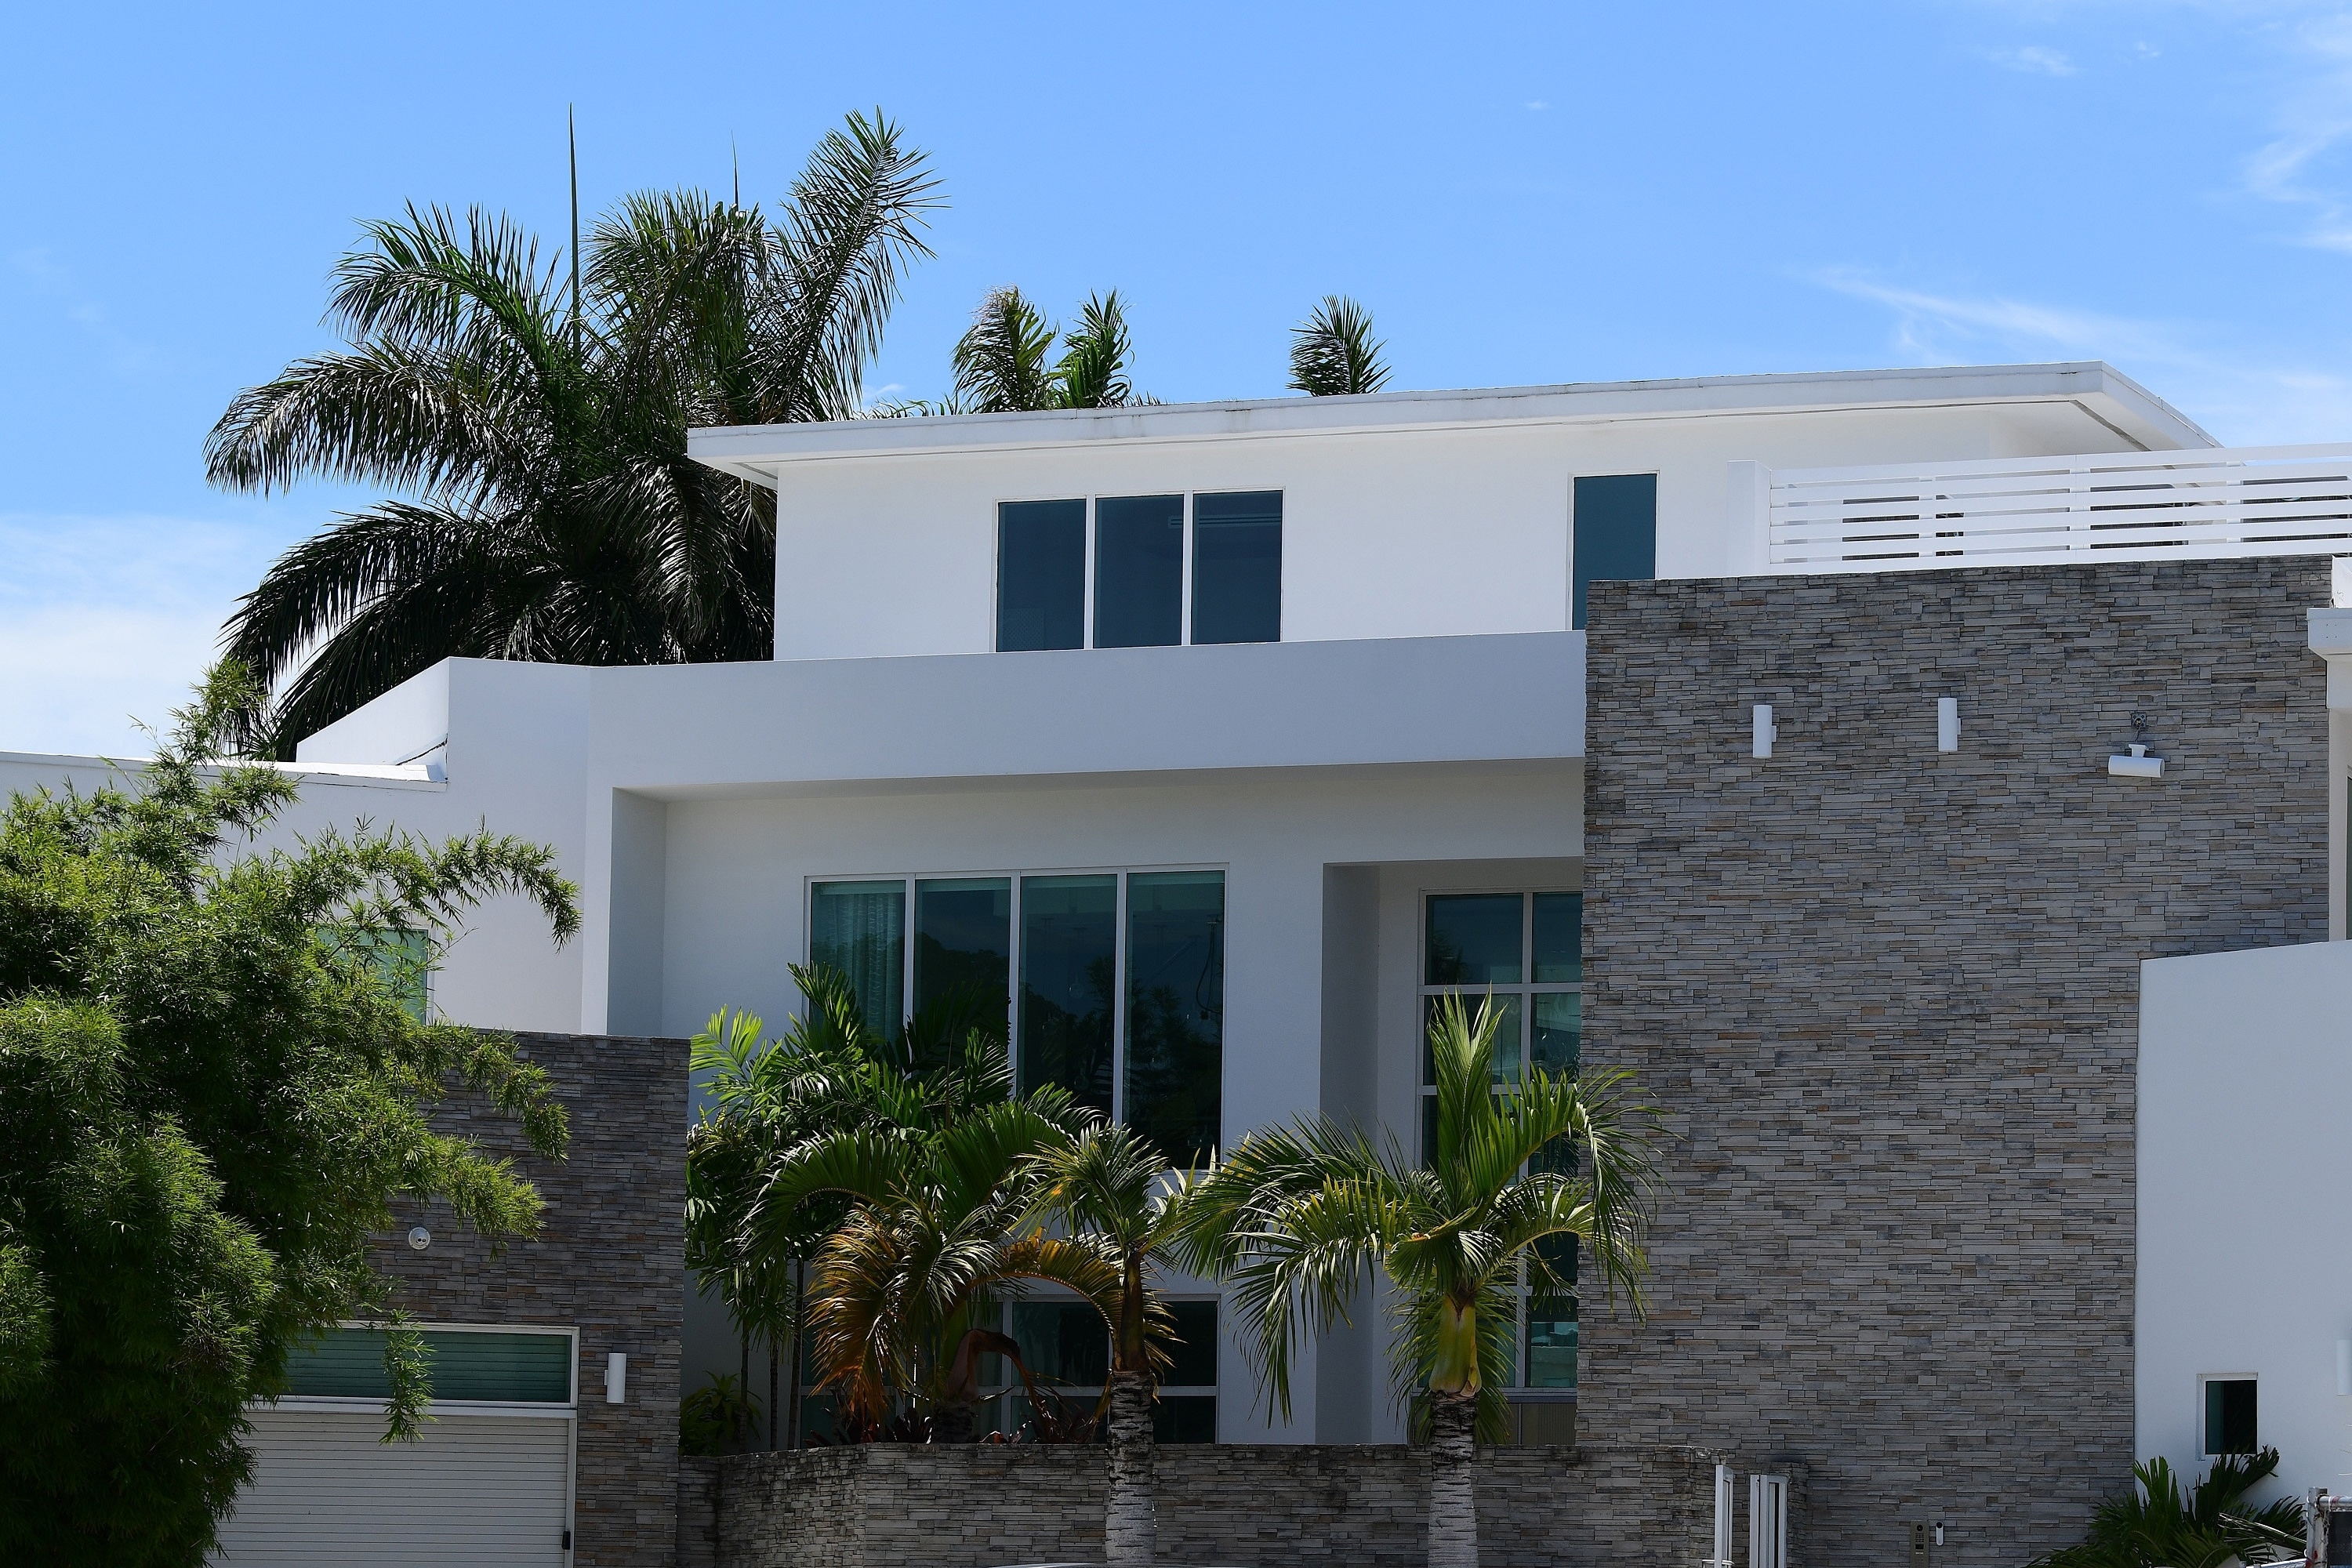 The residence looks modern and with many amenities inside.